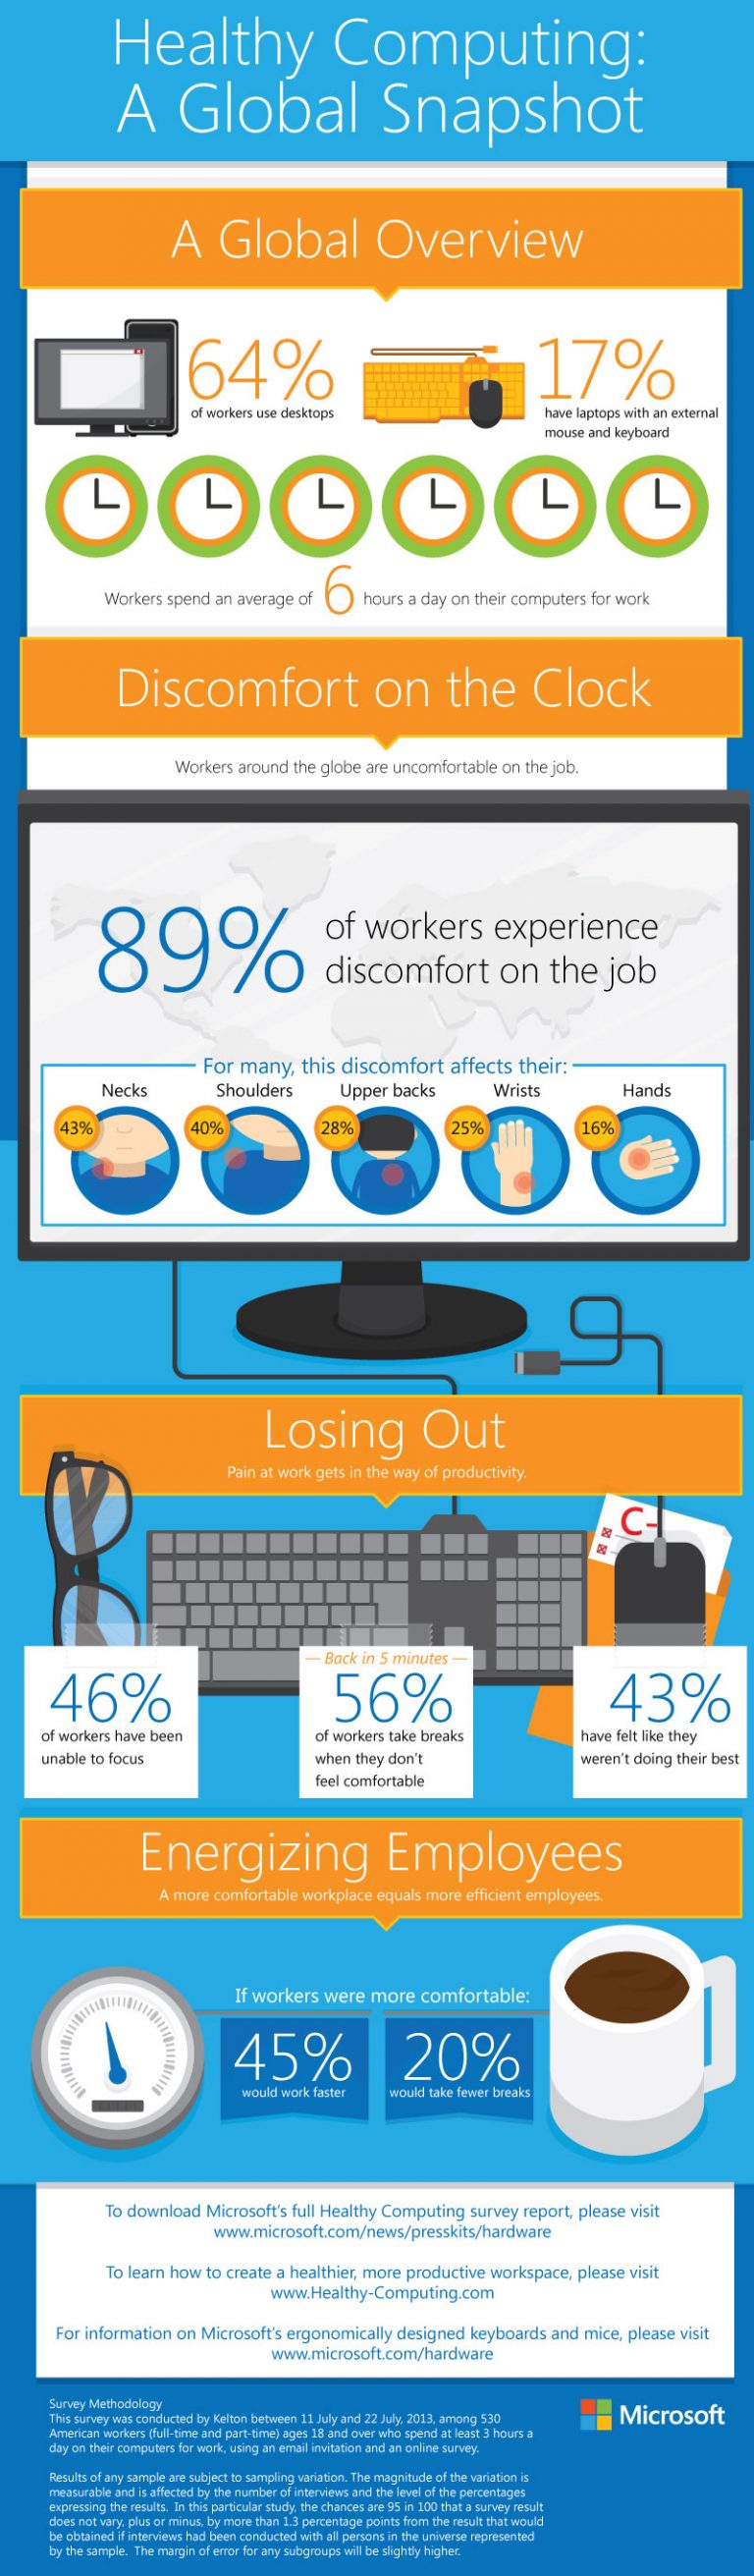 Is your work suffering? See how employees are struggling with uncomfortable workspaces in a global snapshot of results from the Microsoft Healthy Computing Survey conducted by Kelton.